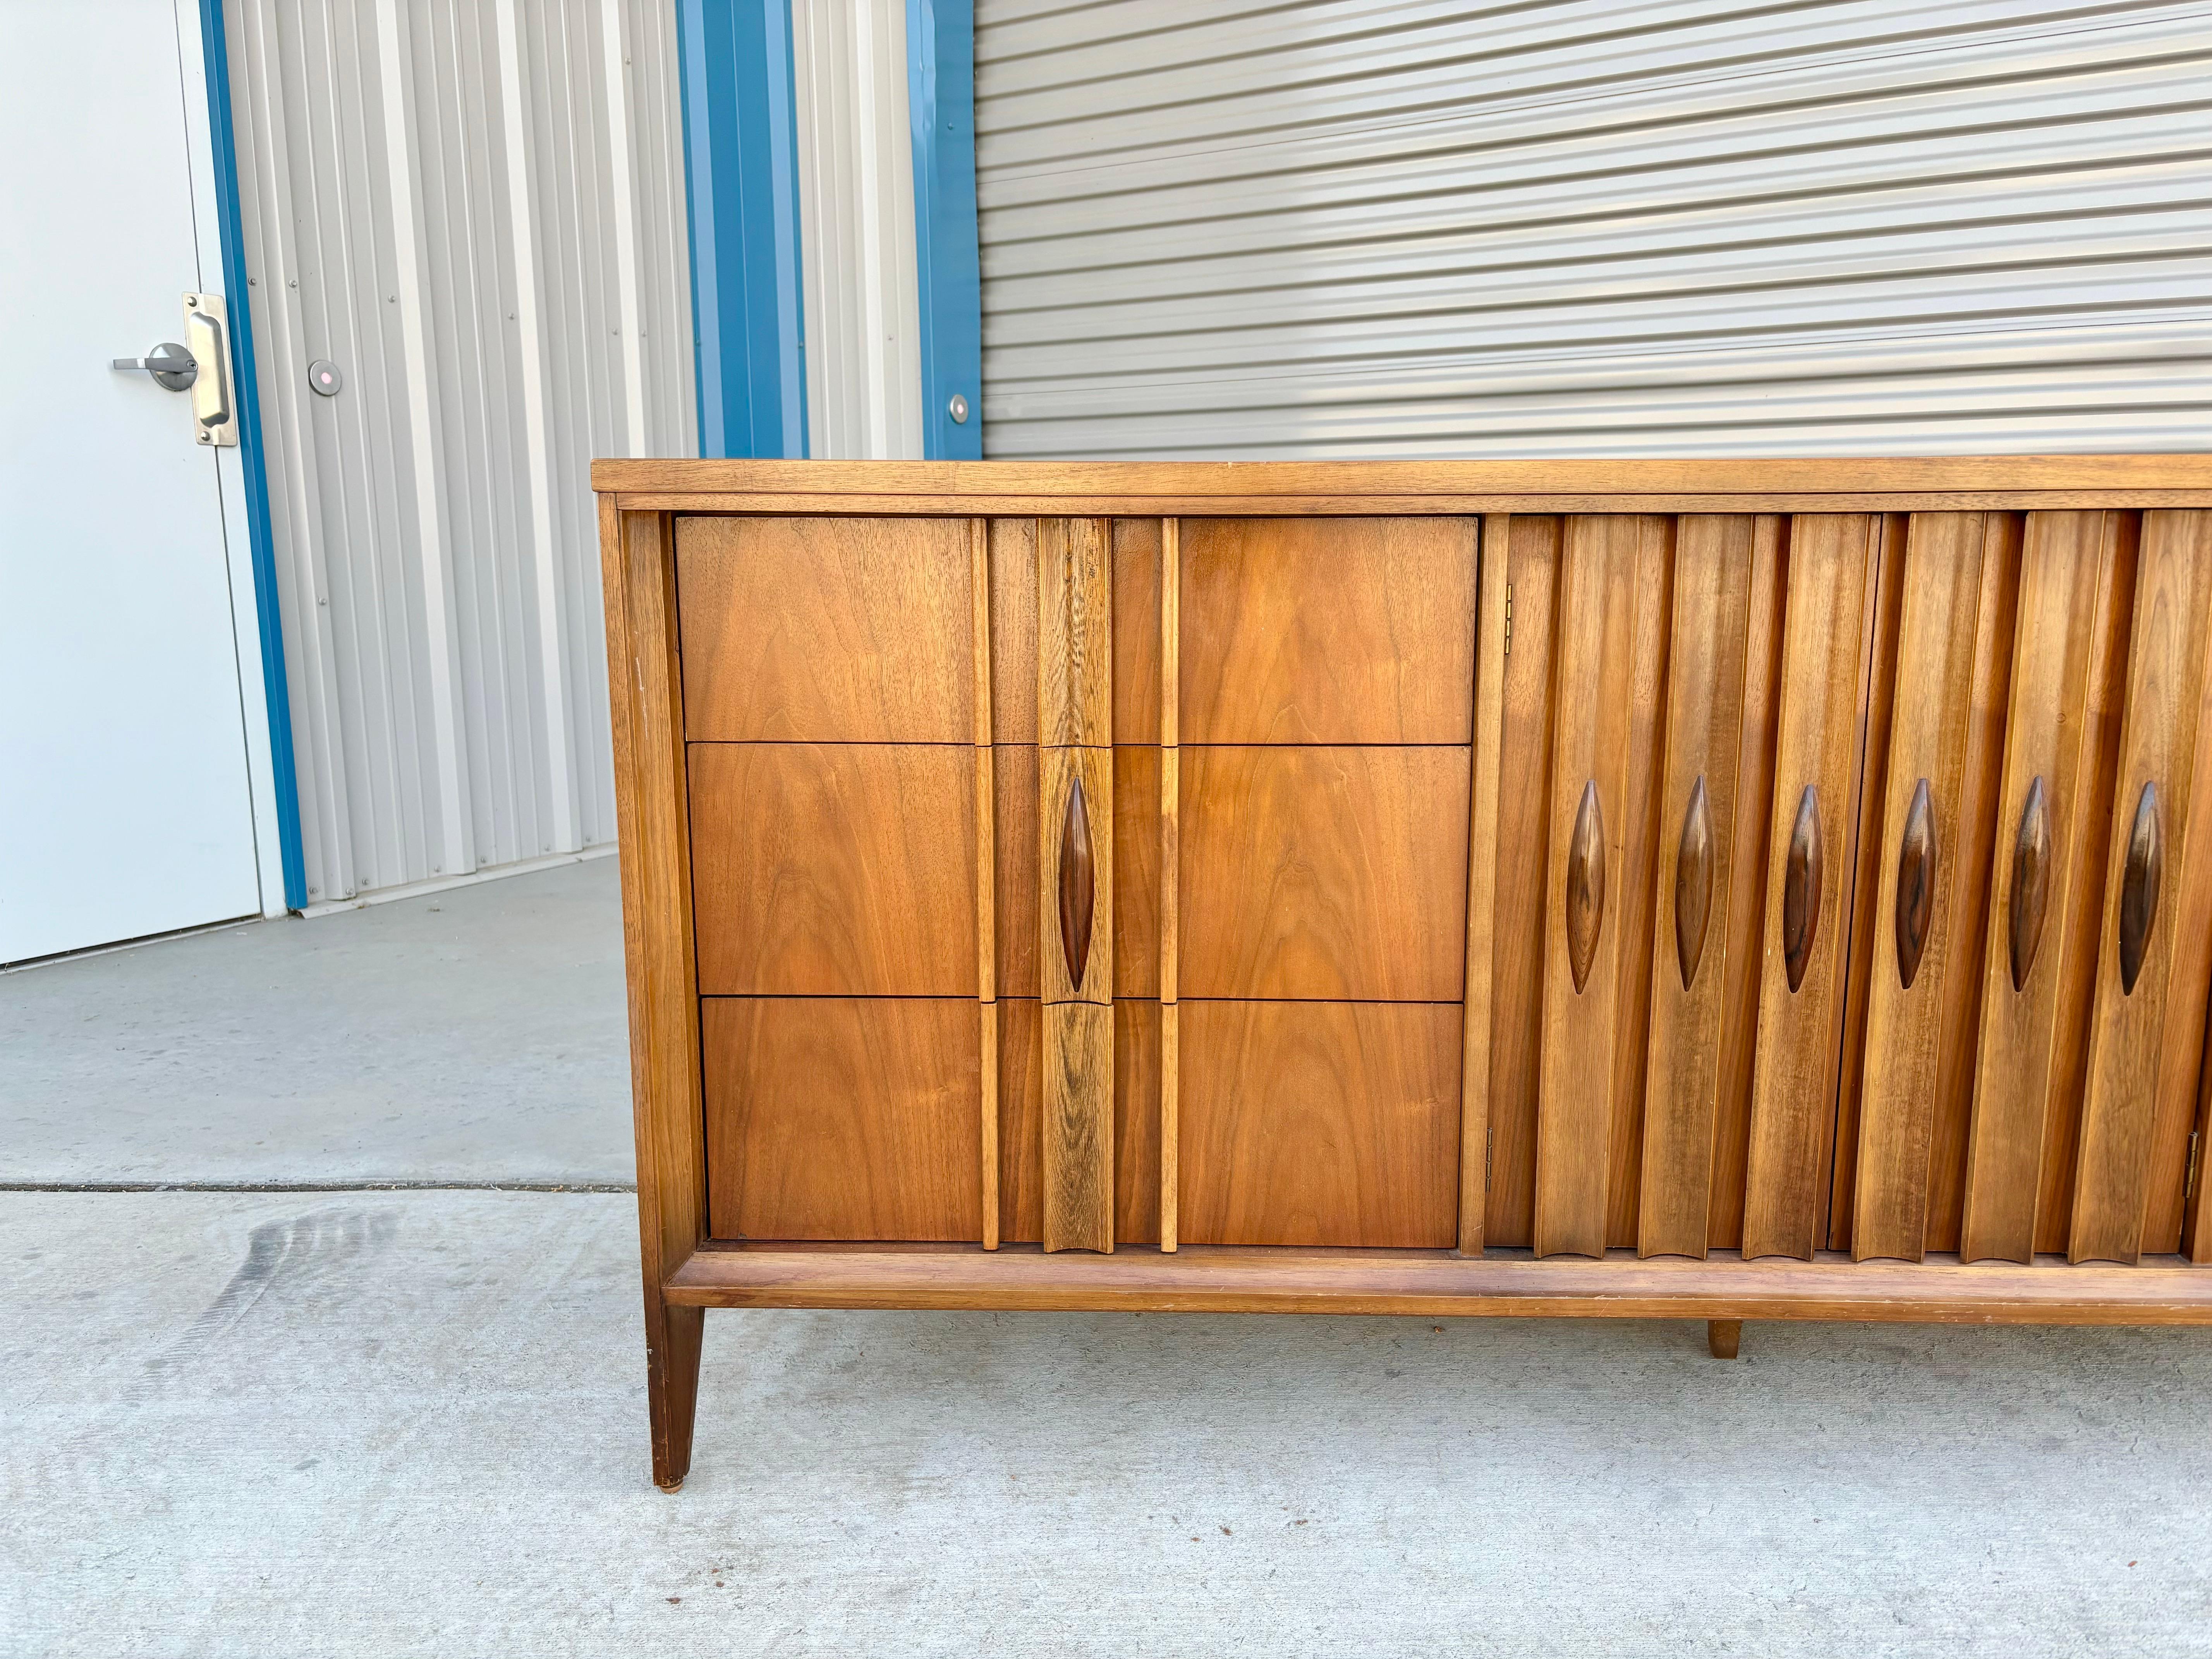 Mid-century walnut sculpted walnut dresser designed by Thomasville in the United States circa 1960s. This stunning dresser features a walnut frame with a unique sculptured rosewood handle. The dresser also comes with nine pull-out drawers, giving